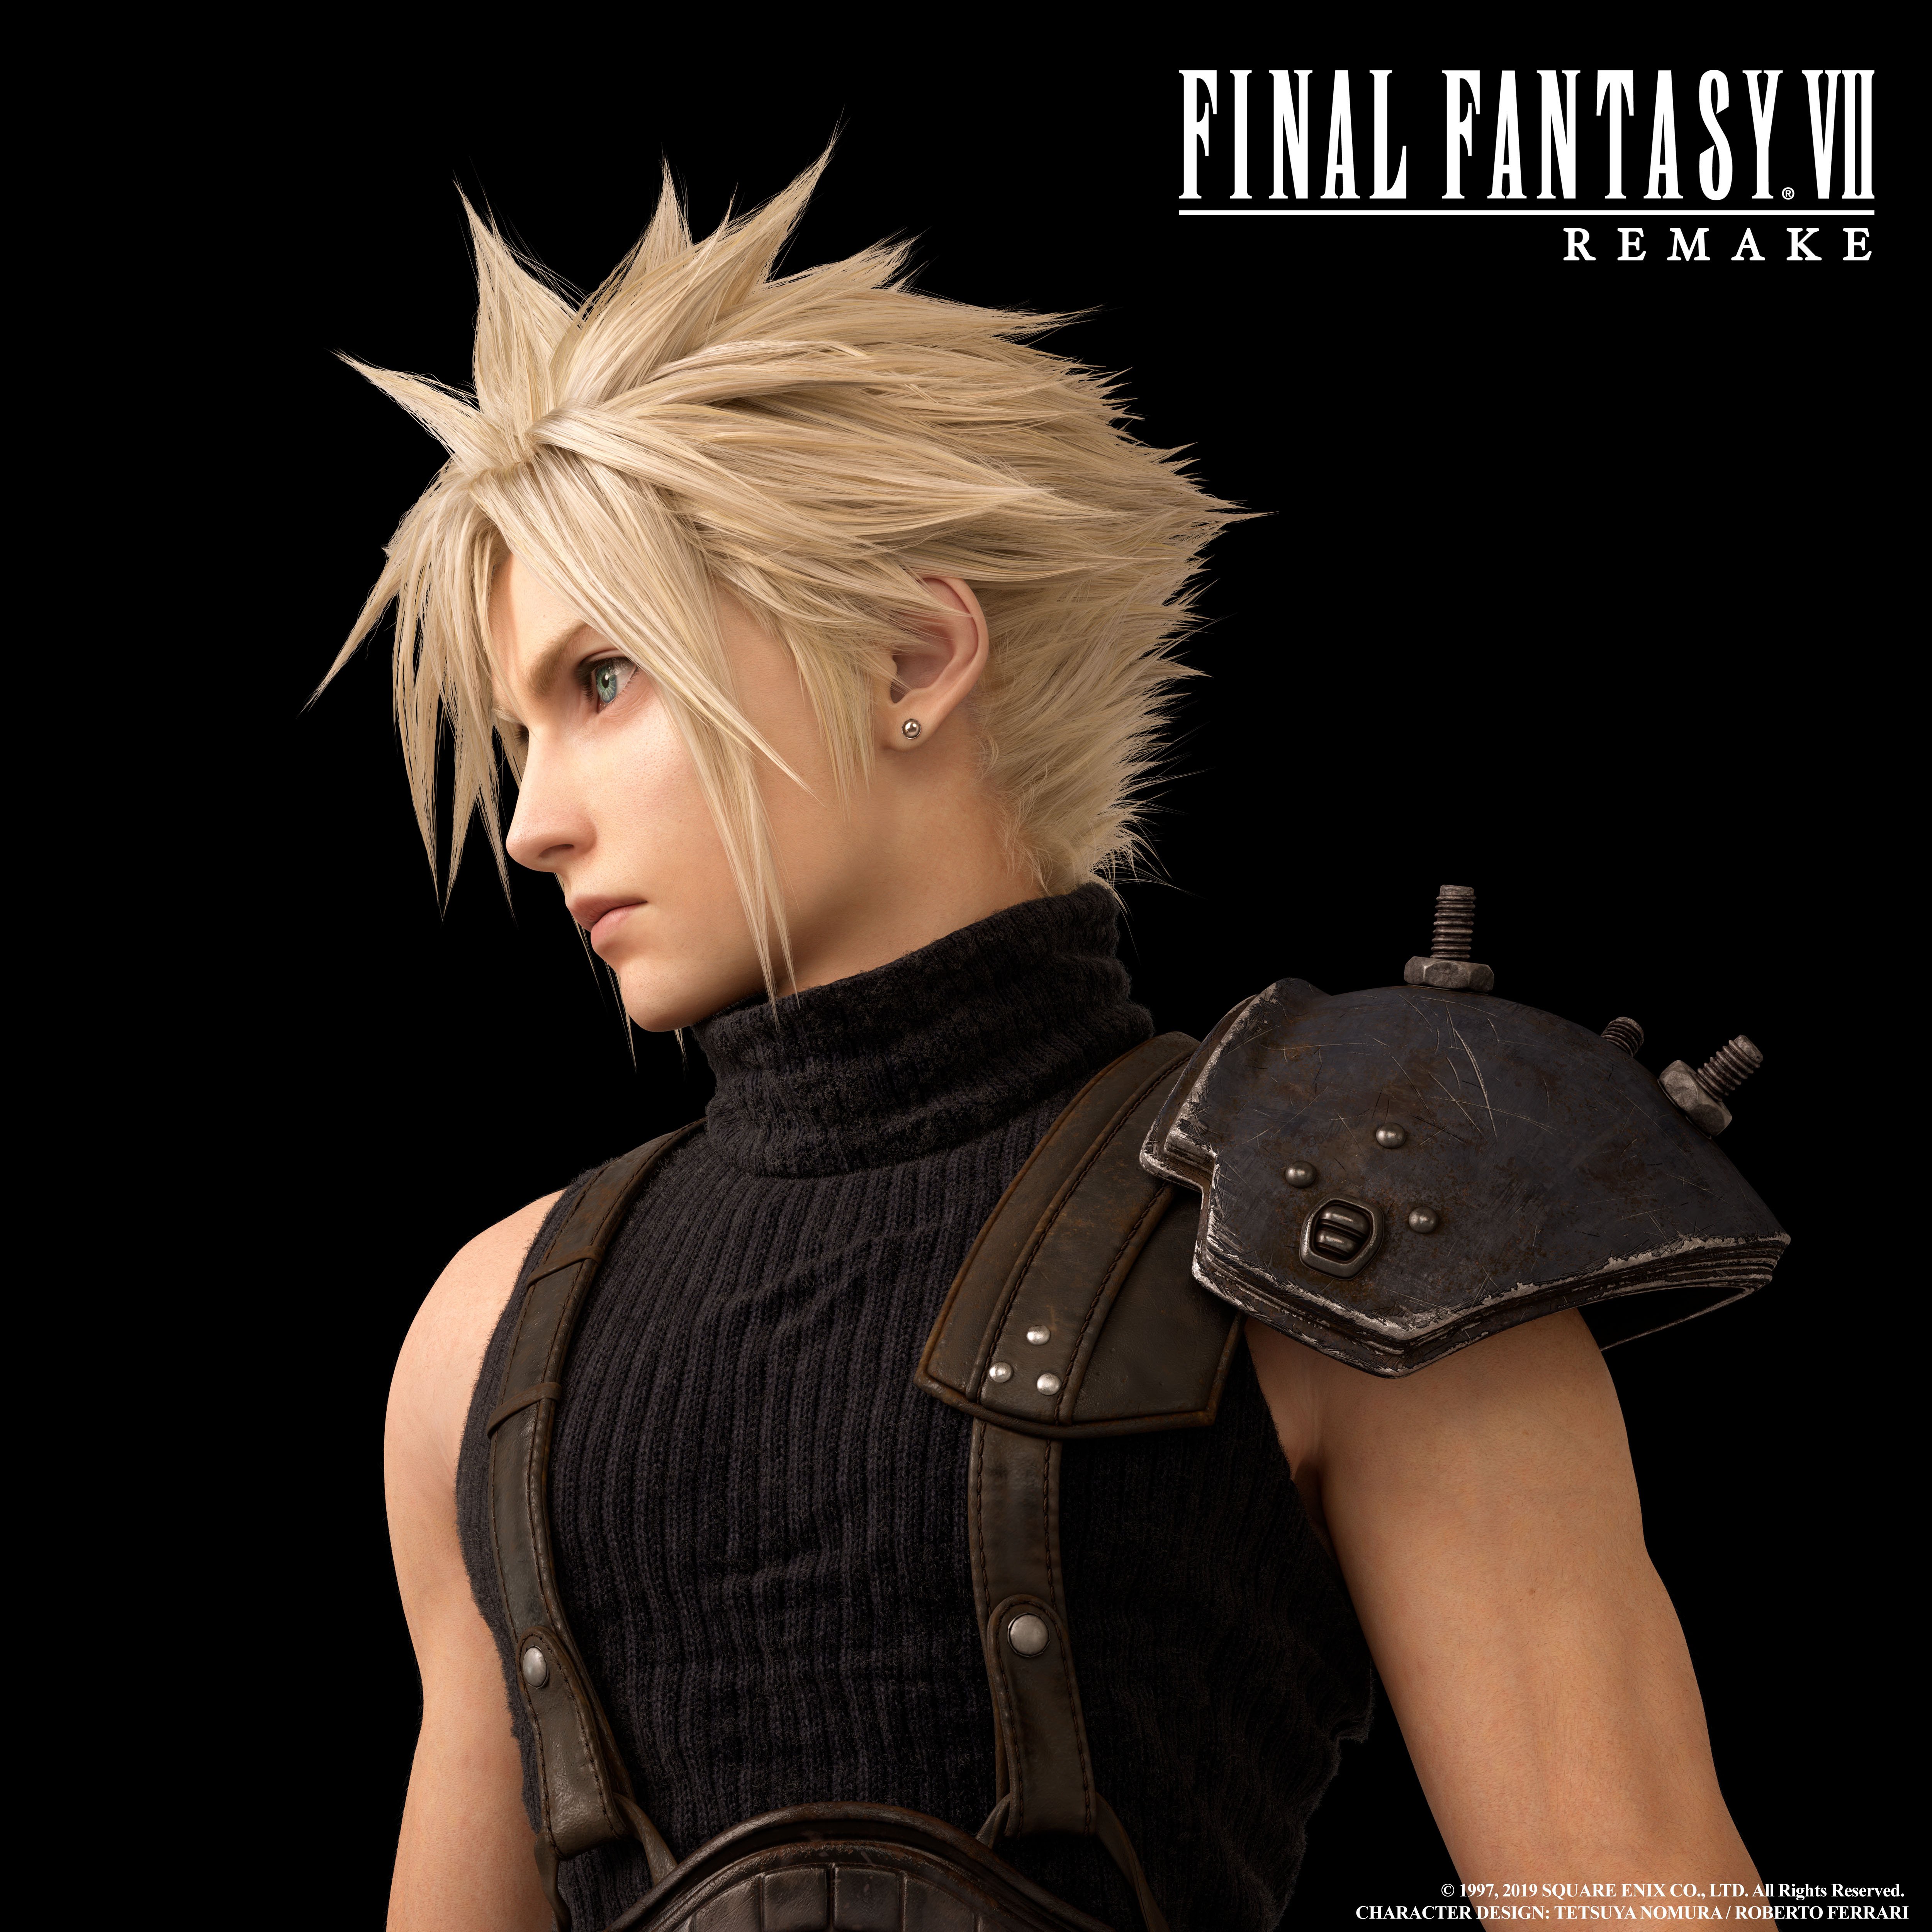 e3-2019-final-fantasy-vii-remake-character-artwork-shows-off-new